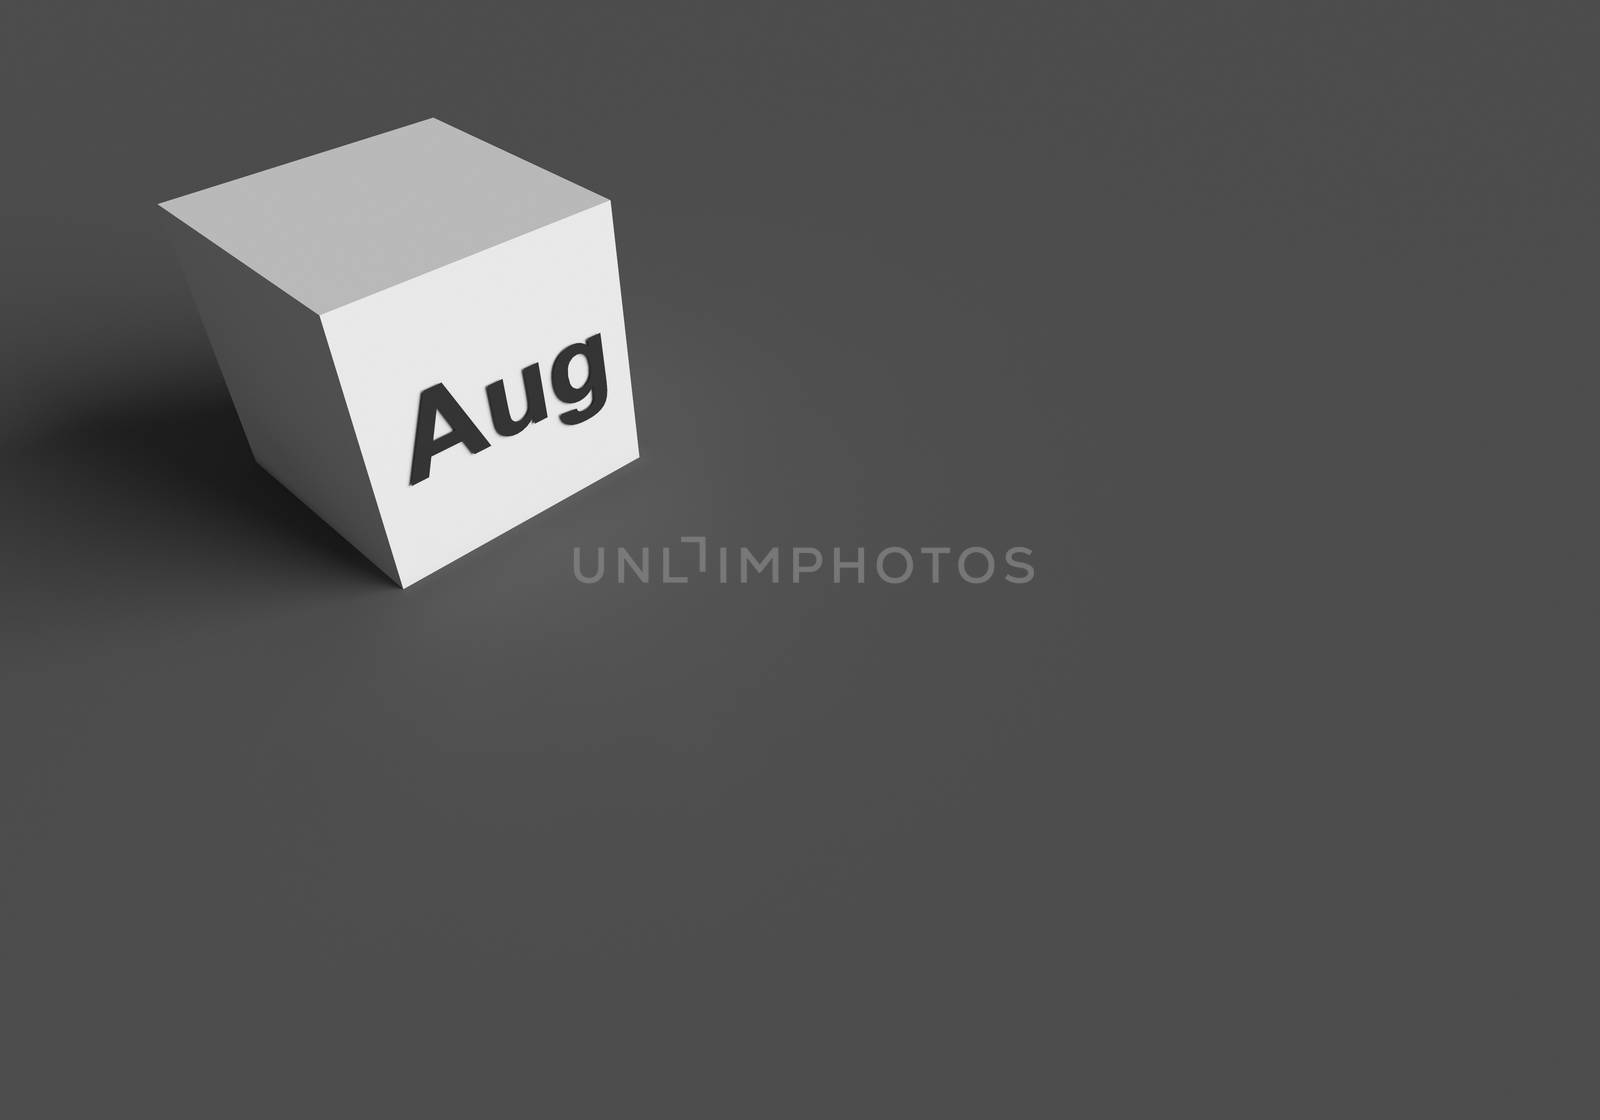 3D RENDERING OF "Aug" (ABBREVIATION OF AUGUST) ON WHITE CUBE, STOCK PHOTO